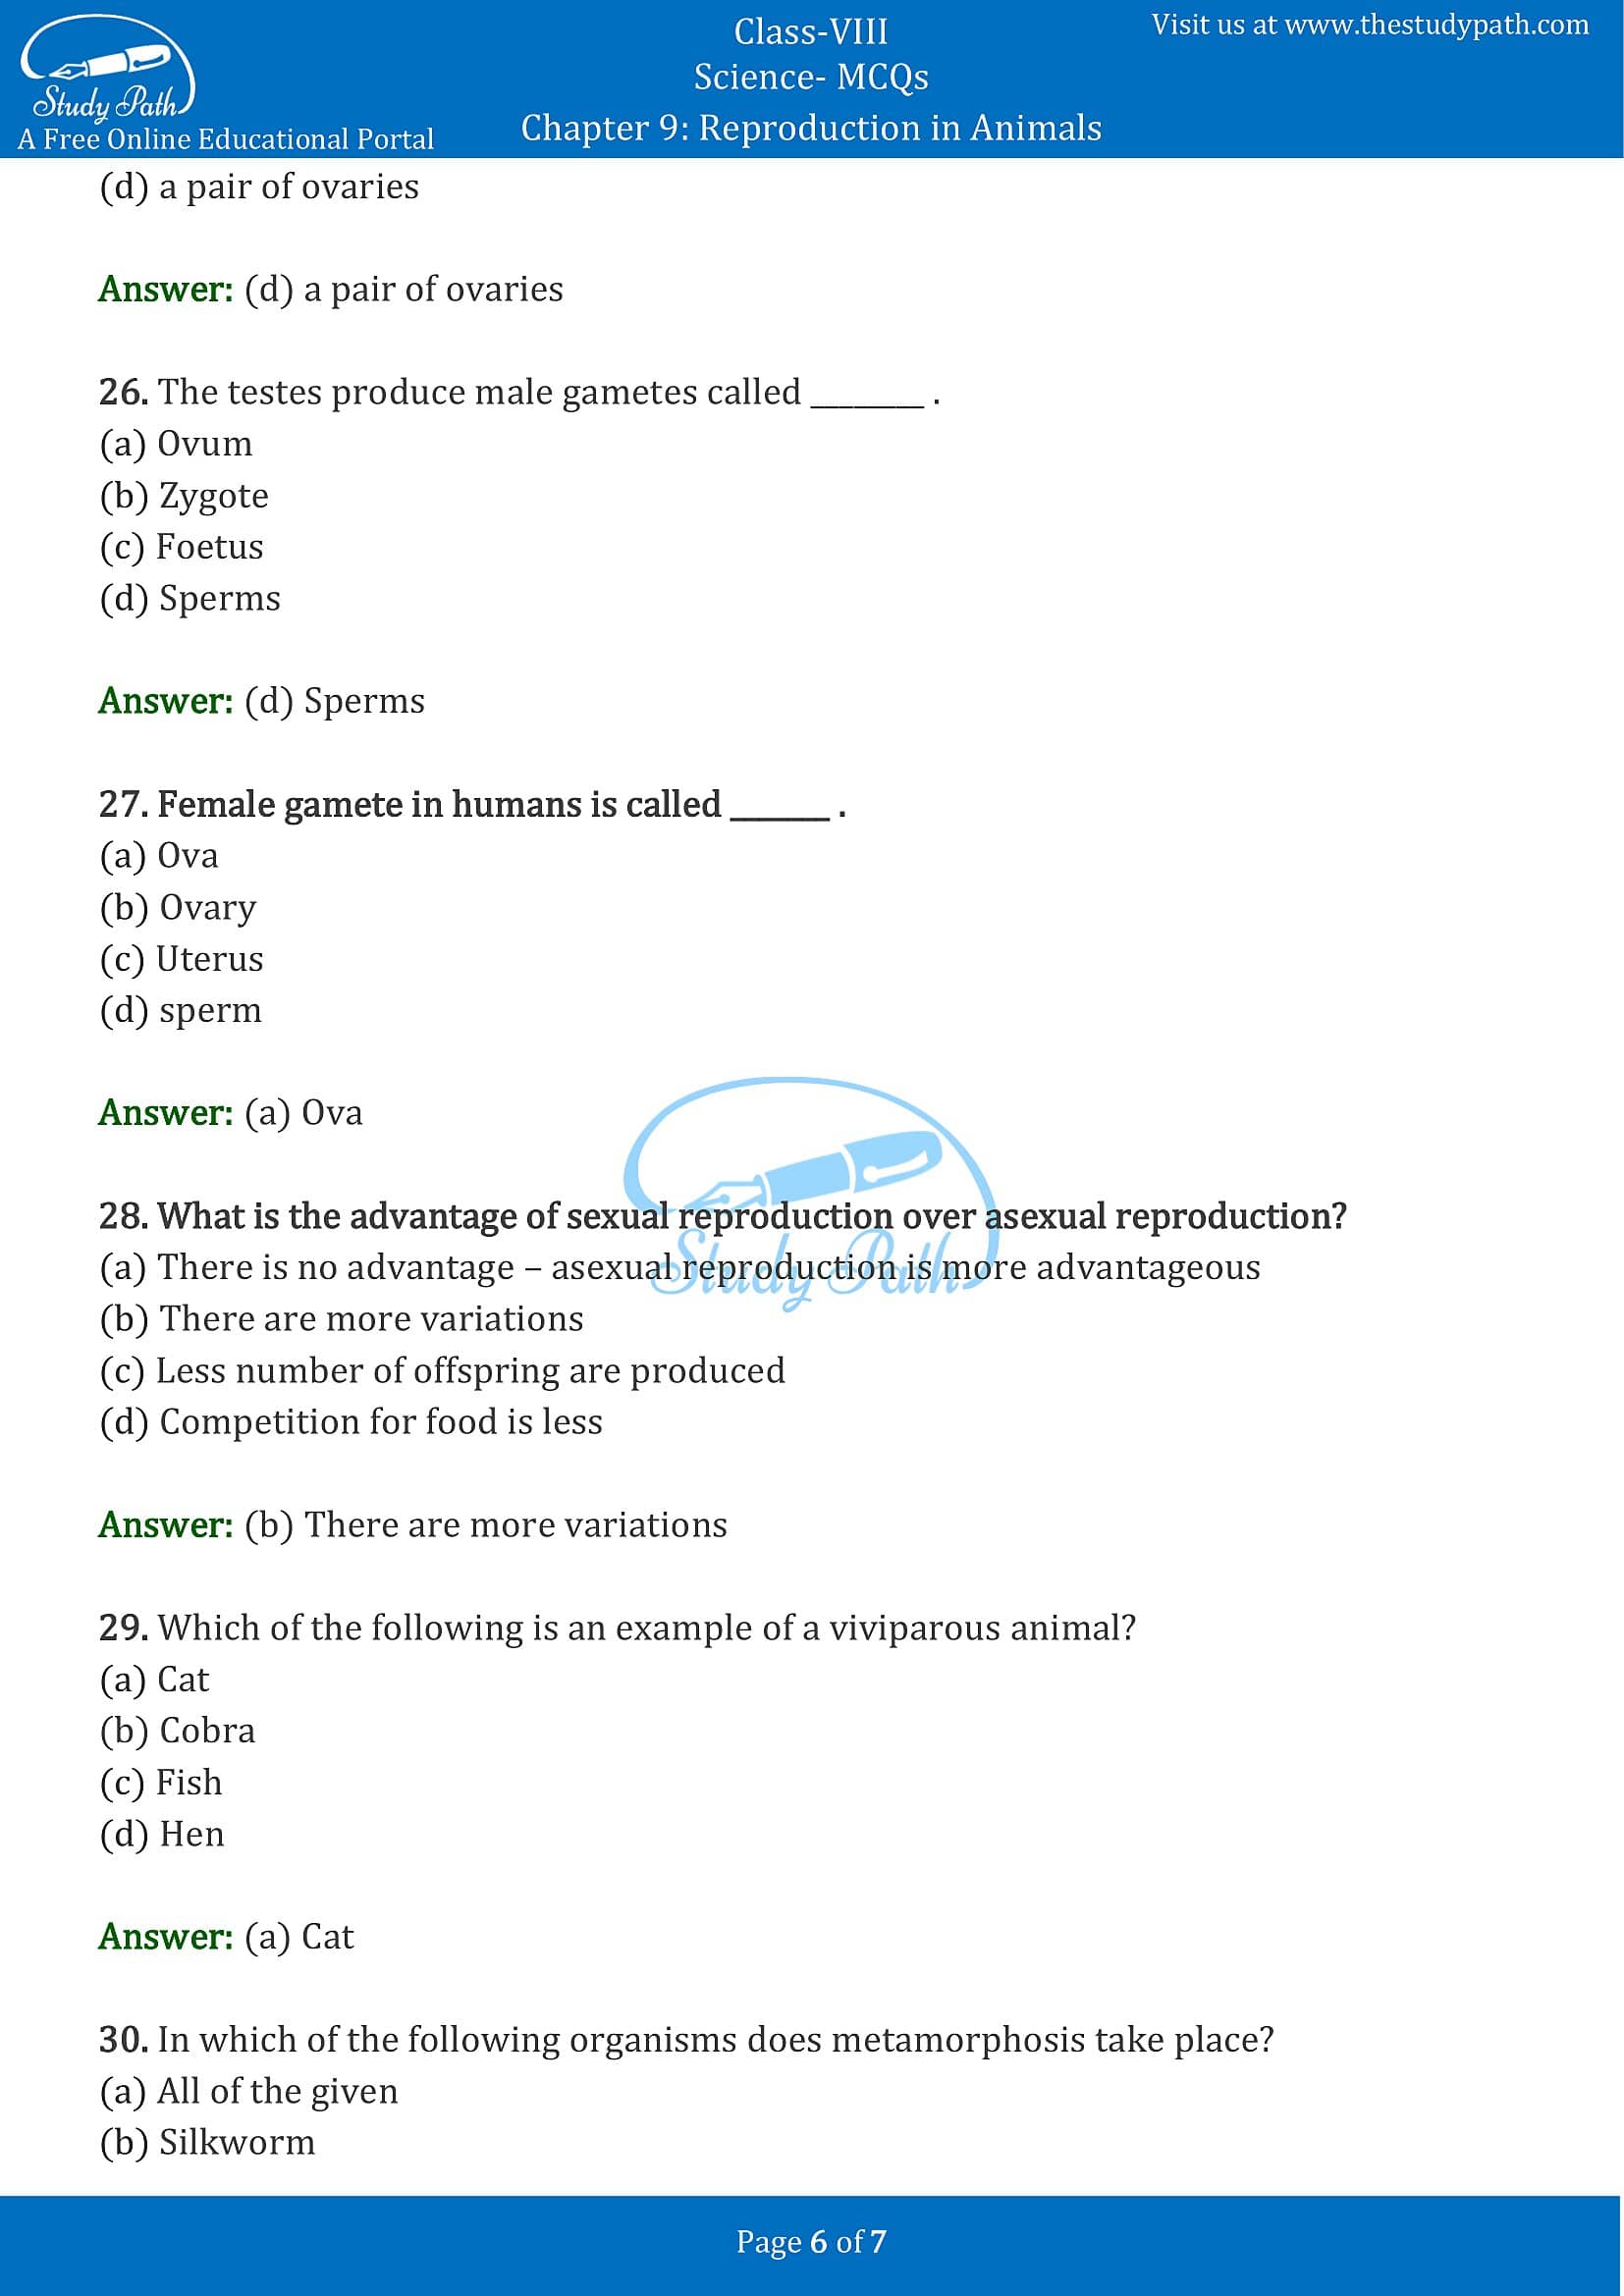 MCQ Questions for Class 8 Science Chapter 9 Reproduction in Animals with Answers PDF -6